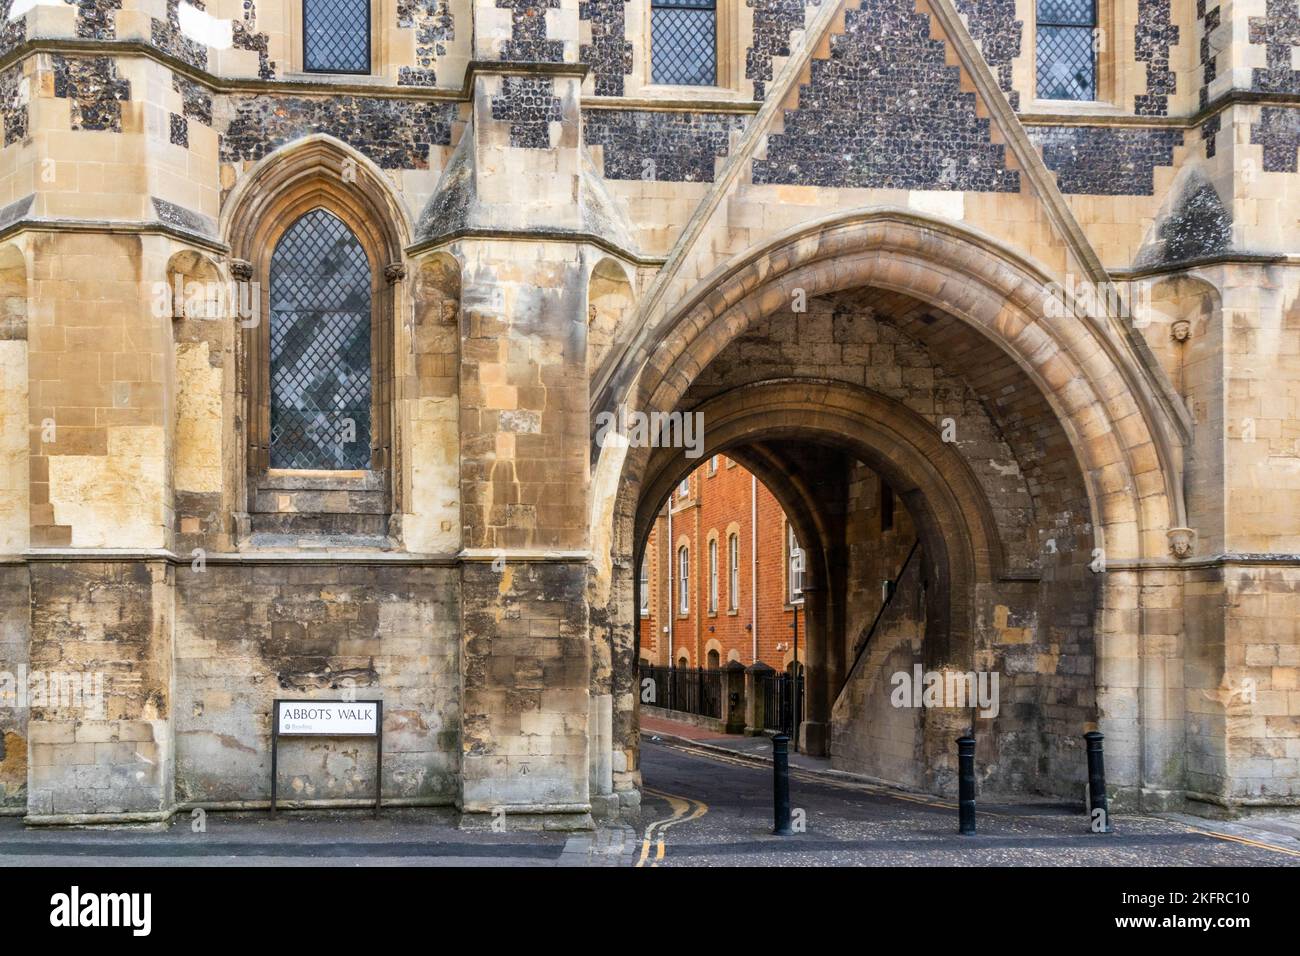 The Abbey Gateway, Abbots Walk, Reading, Berkshire, Angleterre Banque D'Images